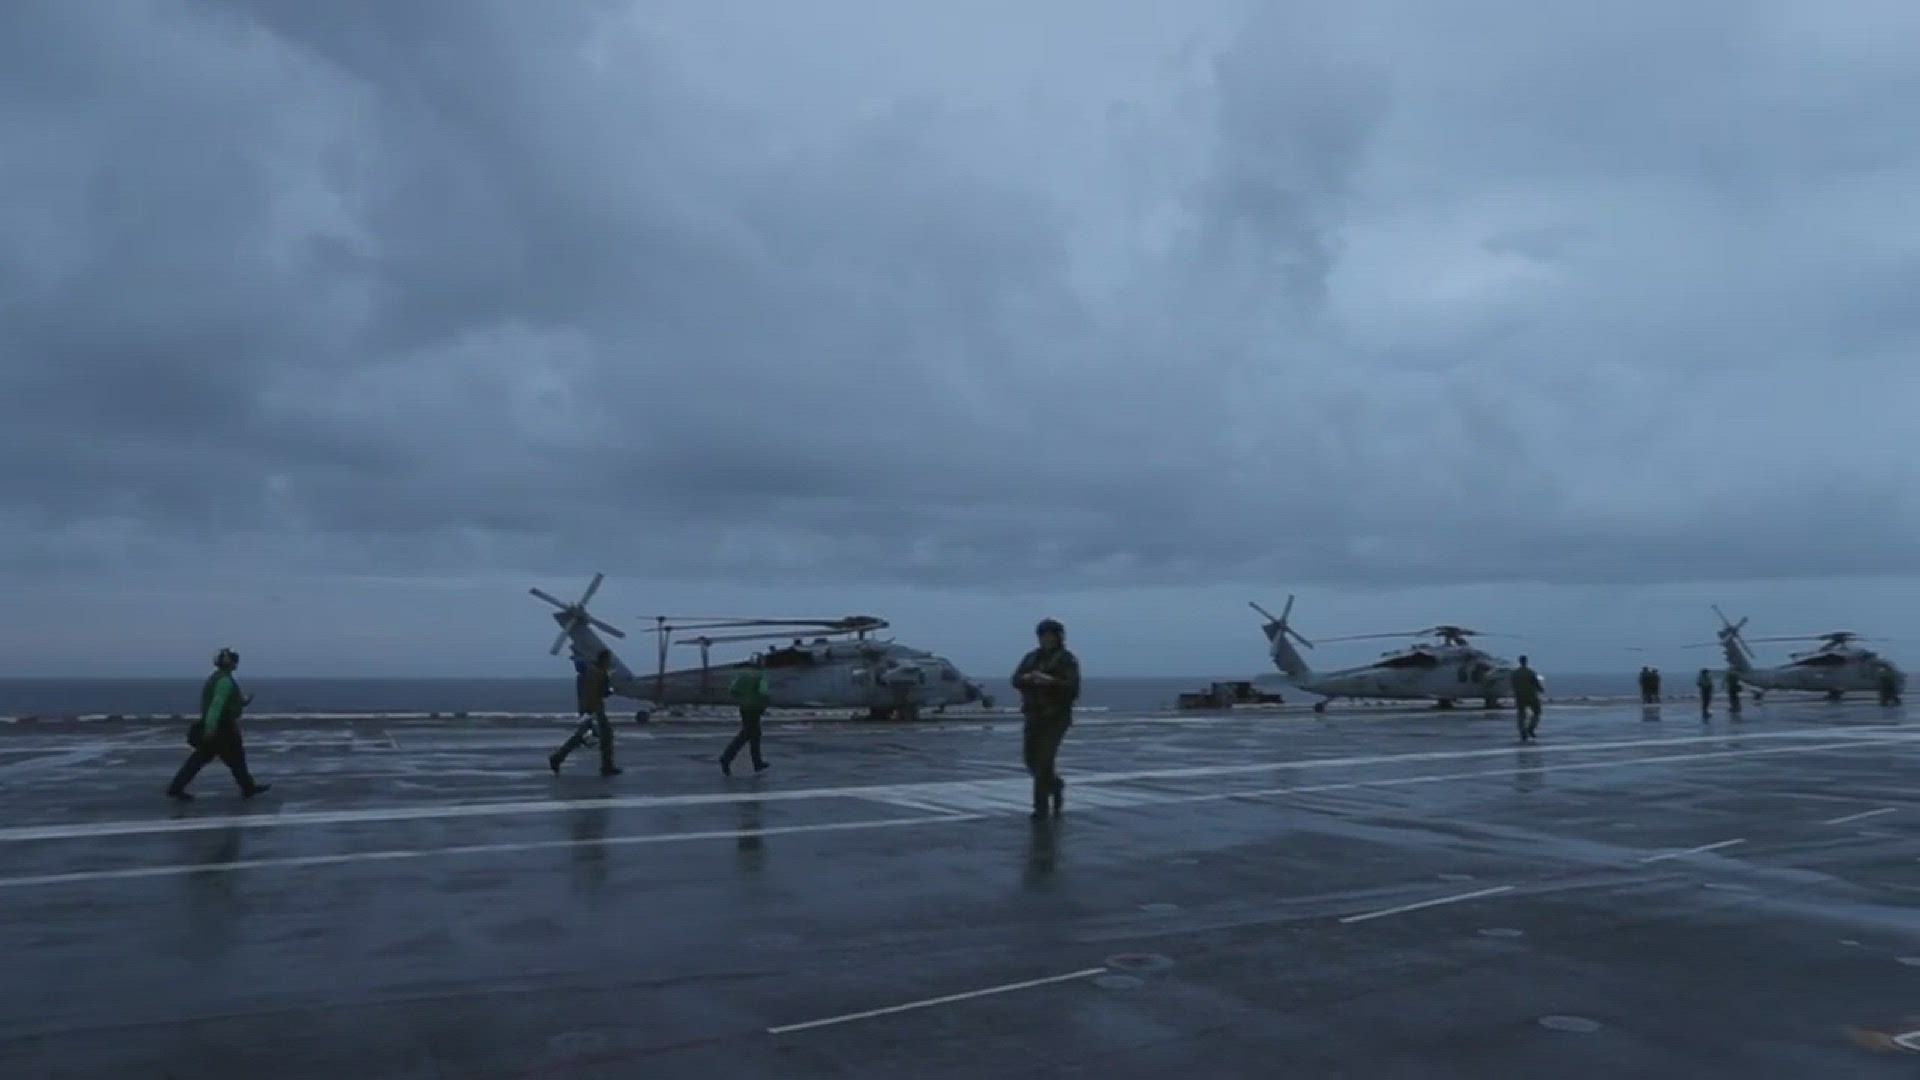 MH-60 Sea Hawk helicopters of HSC-7 were recalled Saturday to Naval Station Norfolk and will be on standby if needed in post-Florence recovery efforts. Video Courtesy of U.S. Navy.